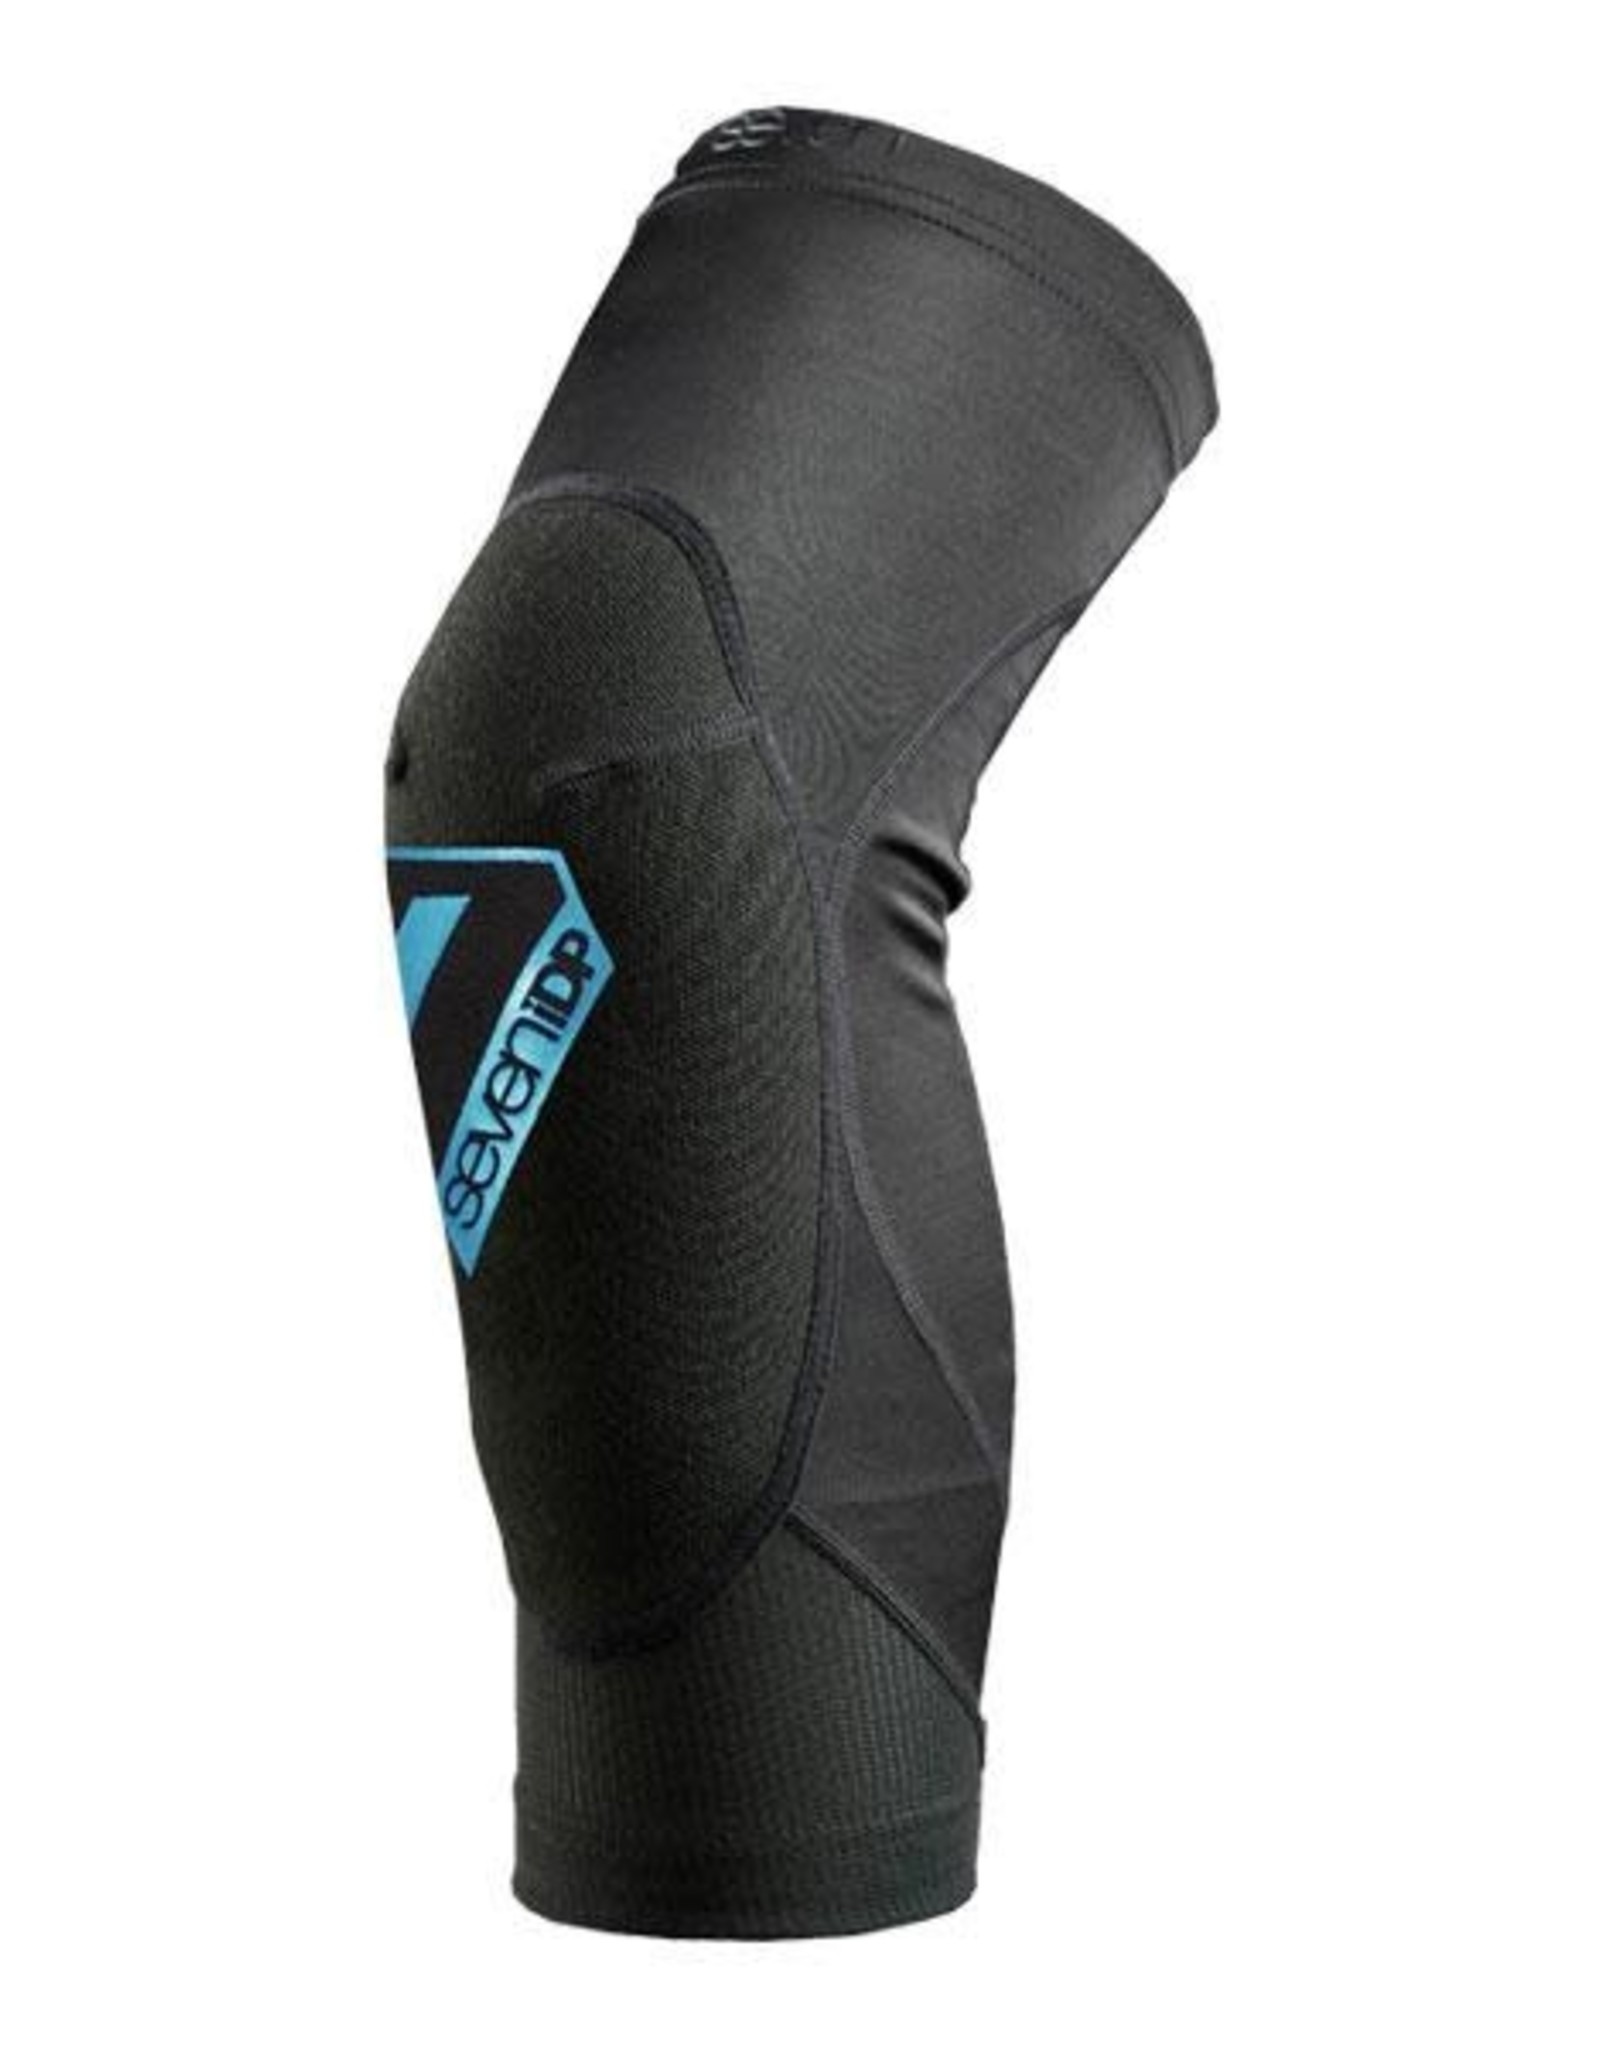 7iDP SEVEN IDP YOUTH TRANSITION KNEE L/XL